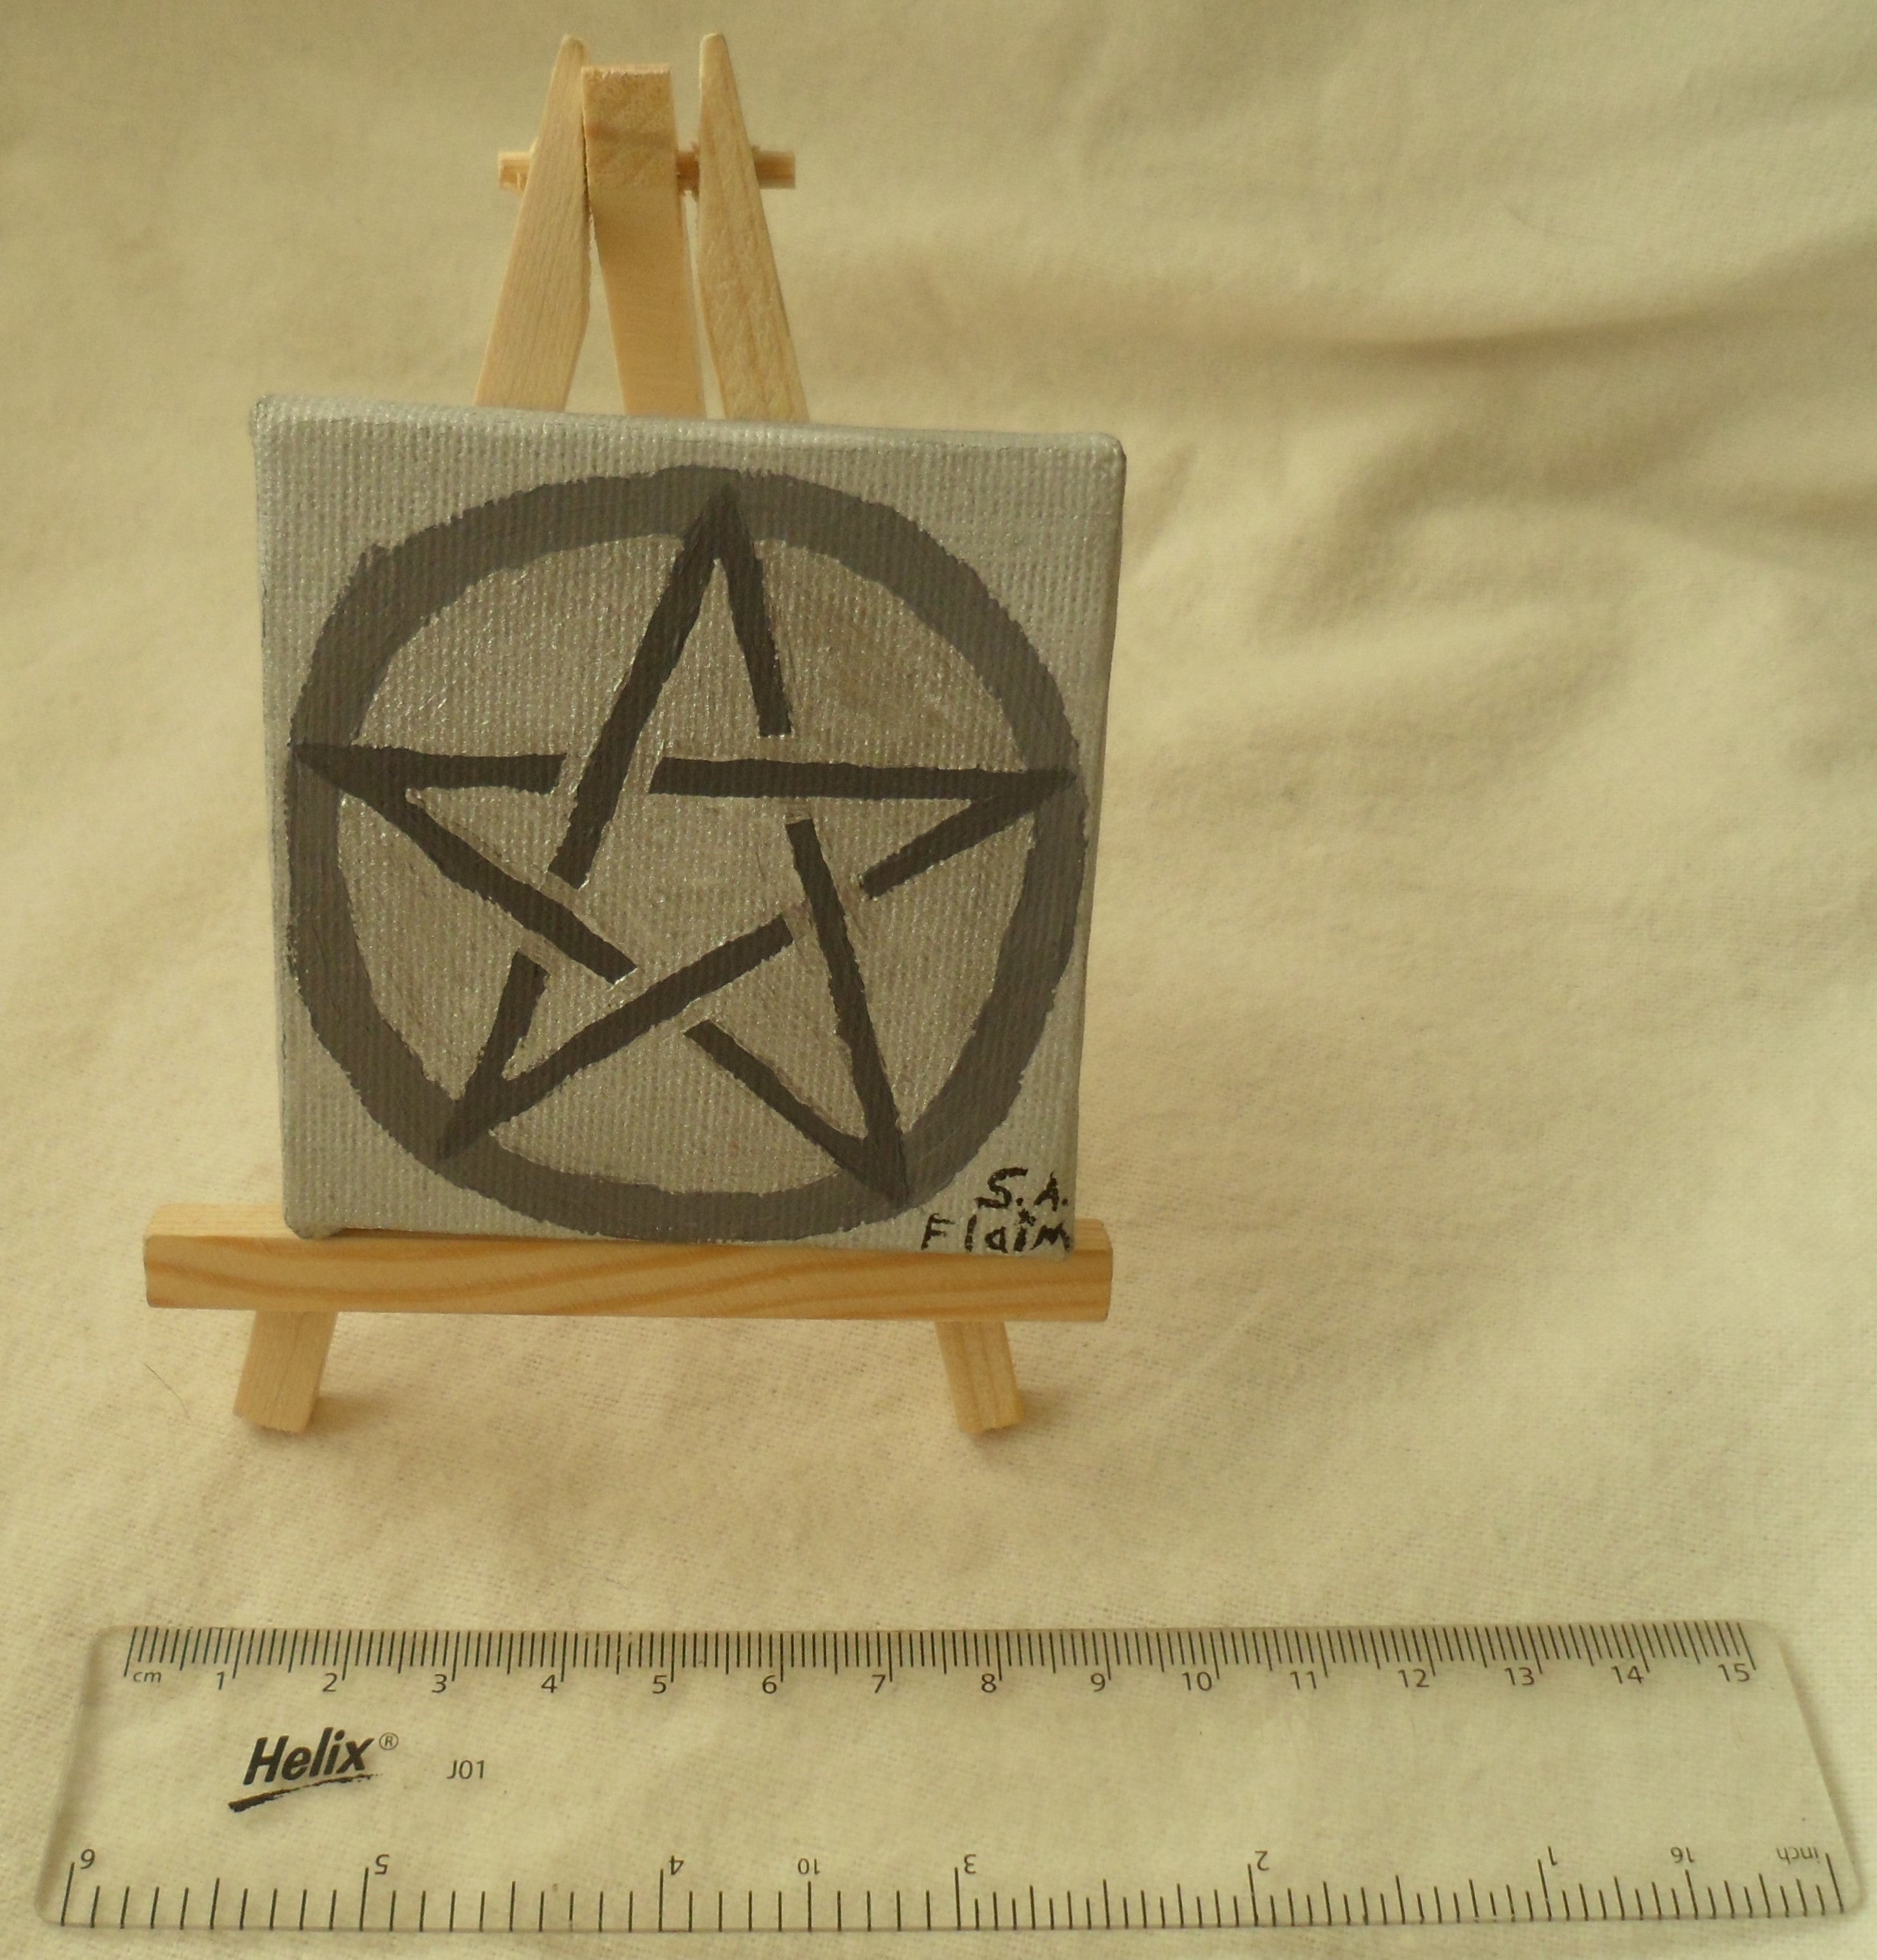 Pentacle Mini Easel Art by S.A.Flaim - Tully Crafts